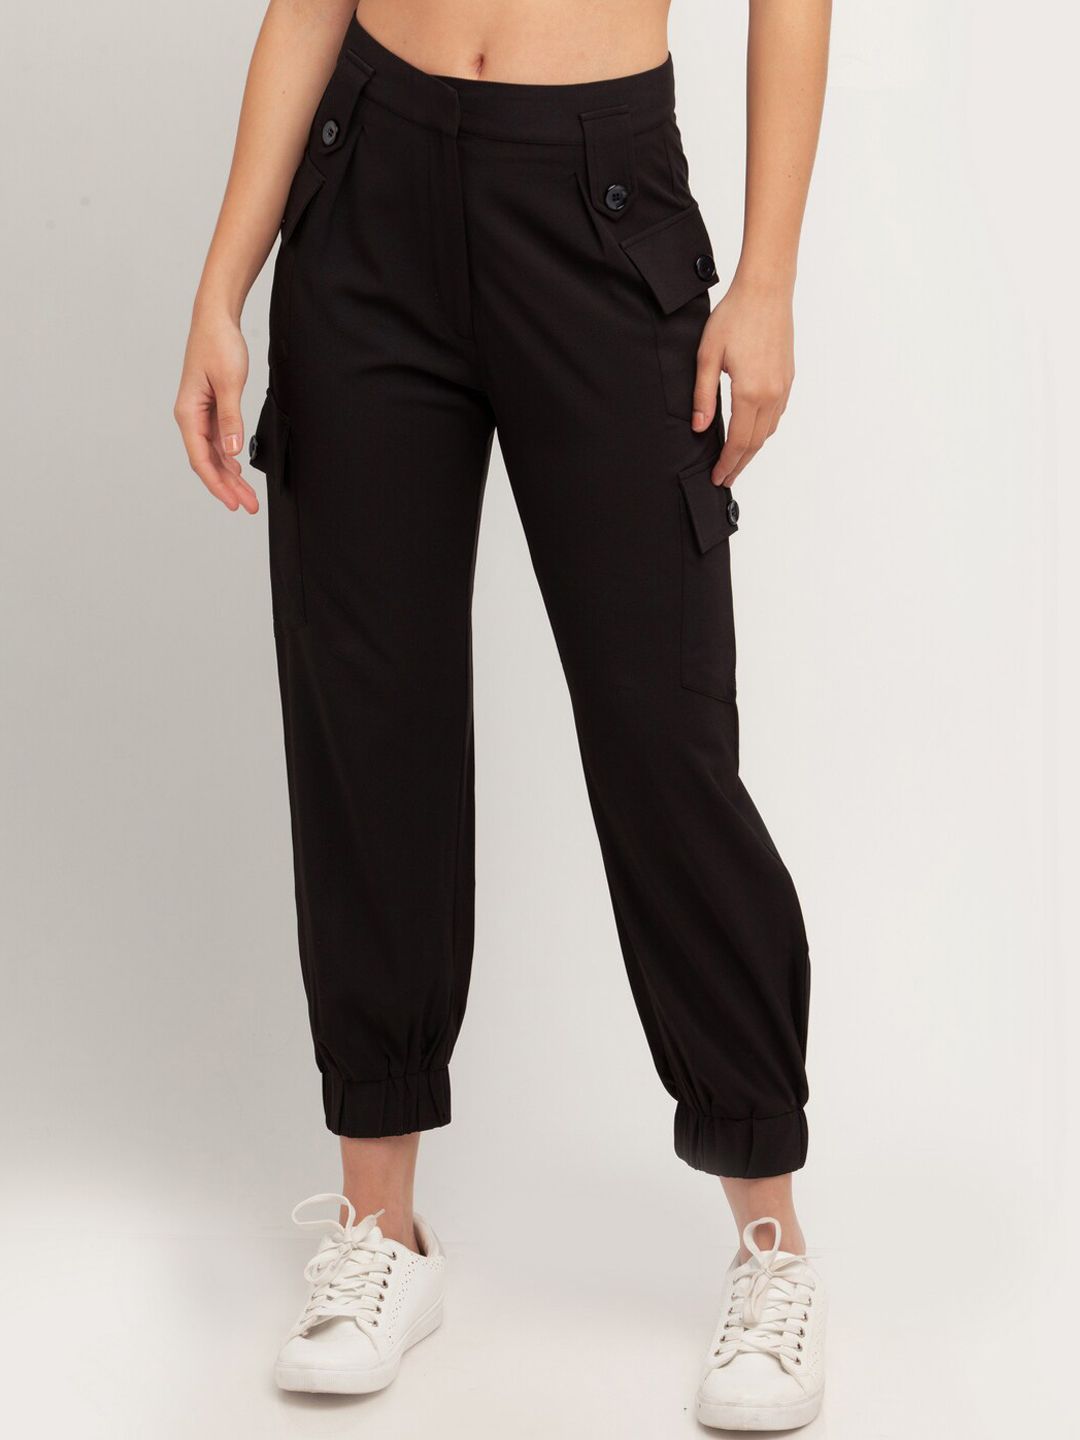 Zink London Women Black Joggers Trousers Price in India